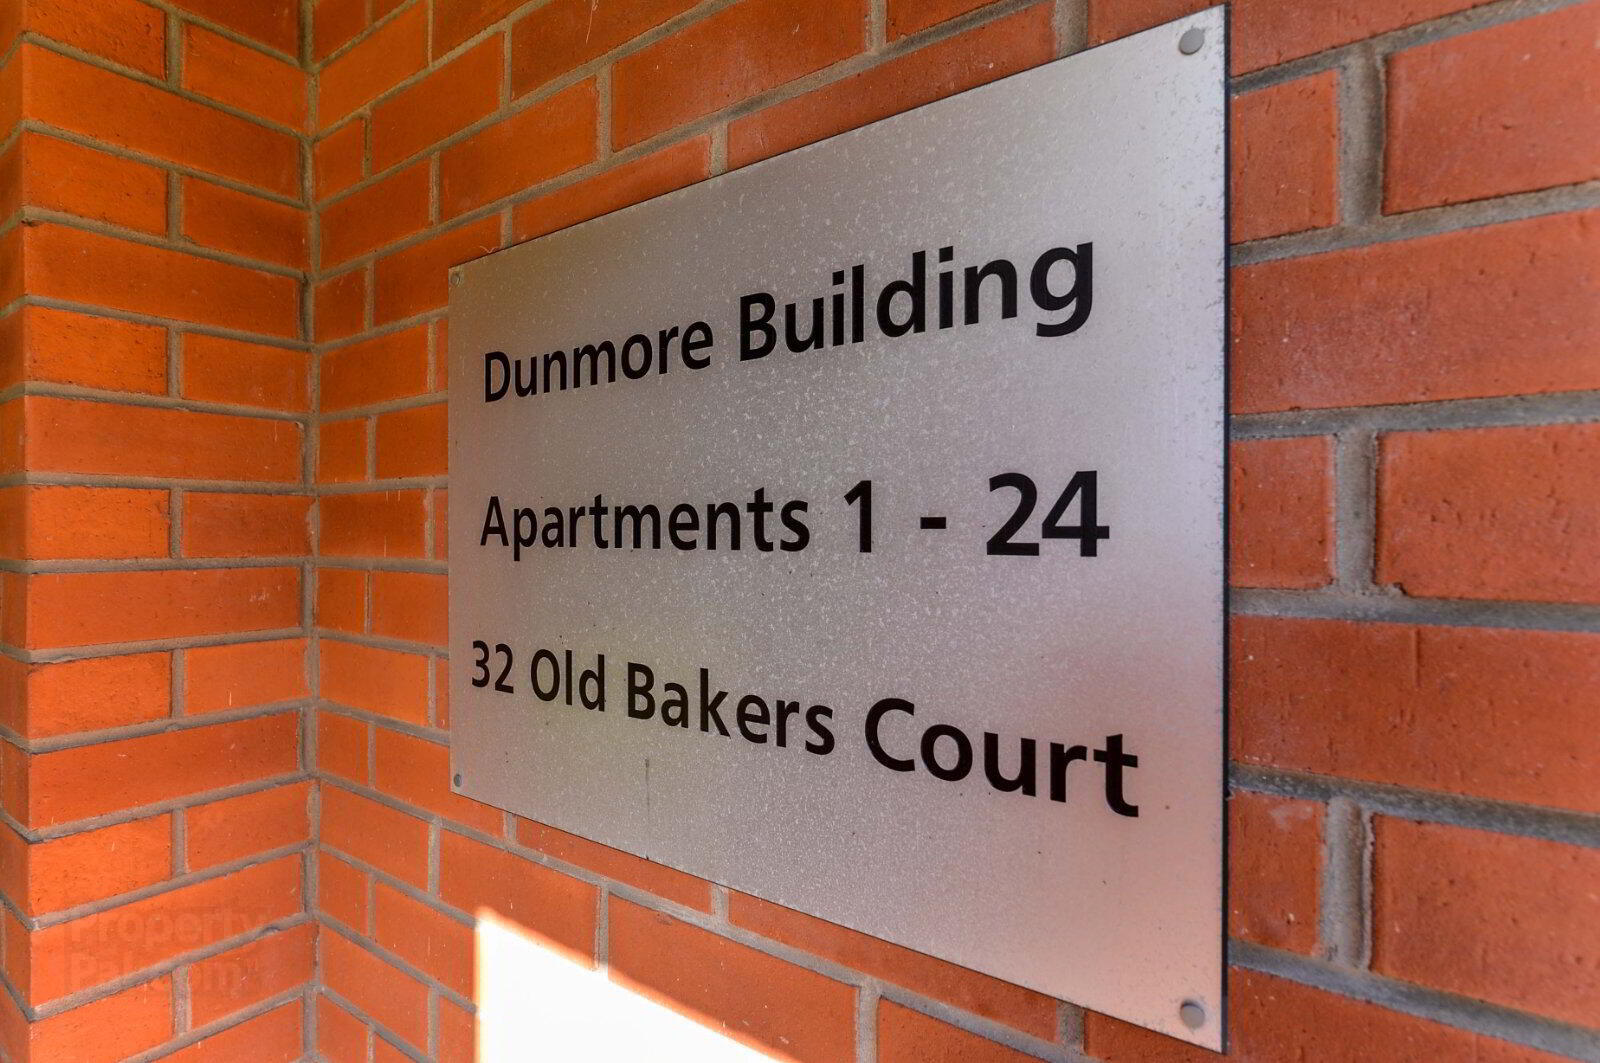 Apartment 2 Dunmore Building 32 Old Bakers Court